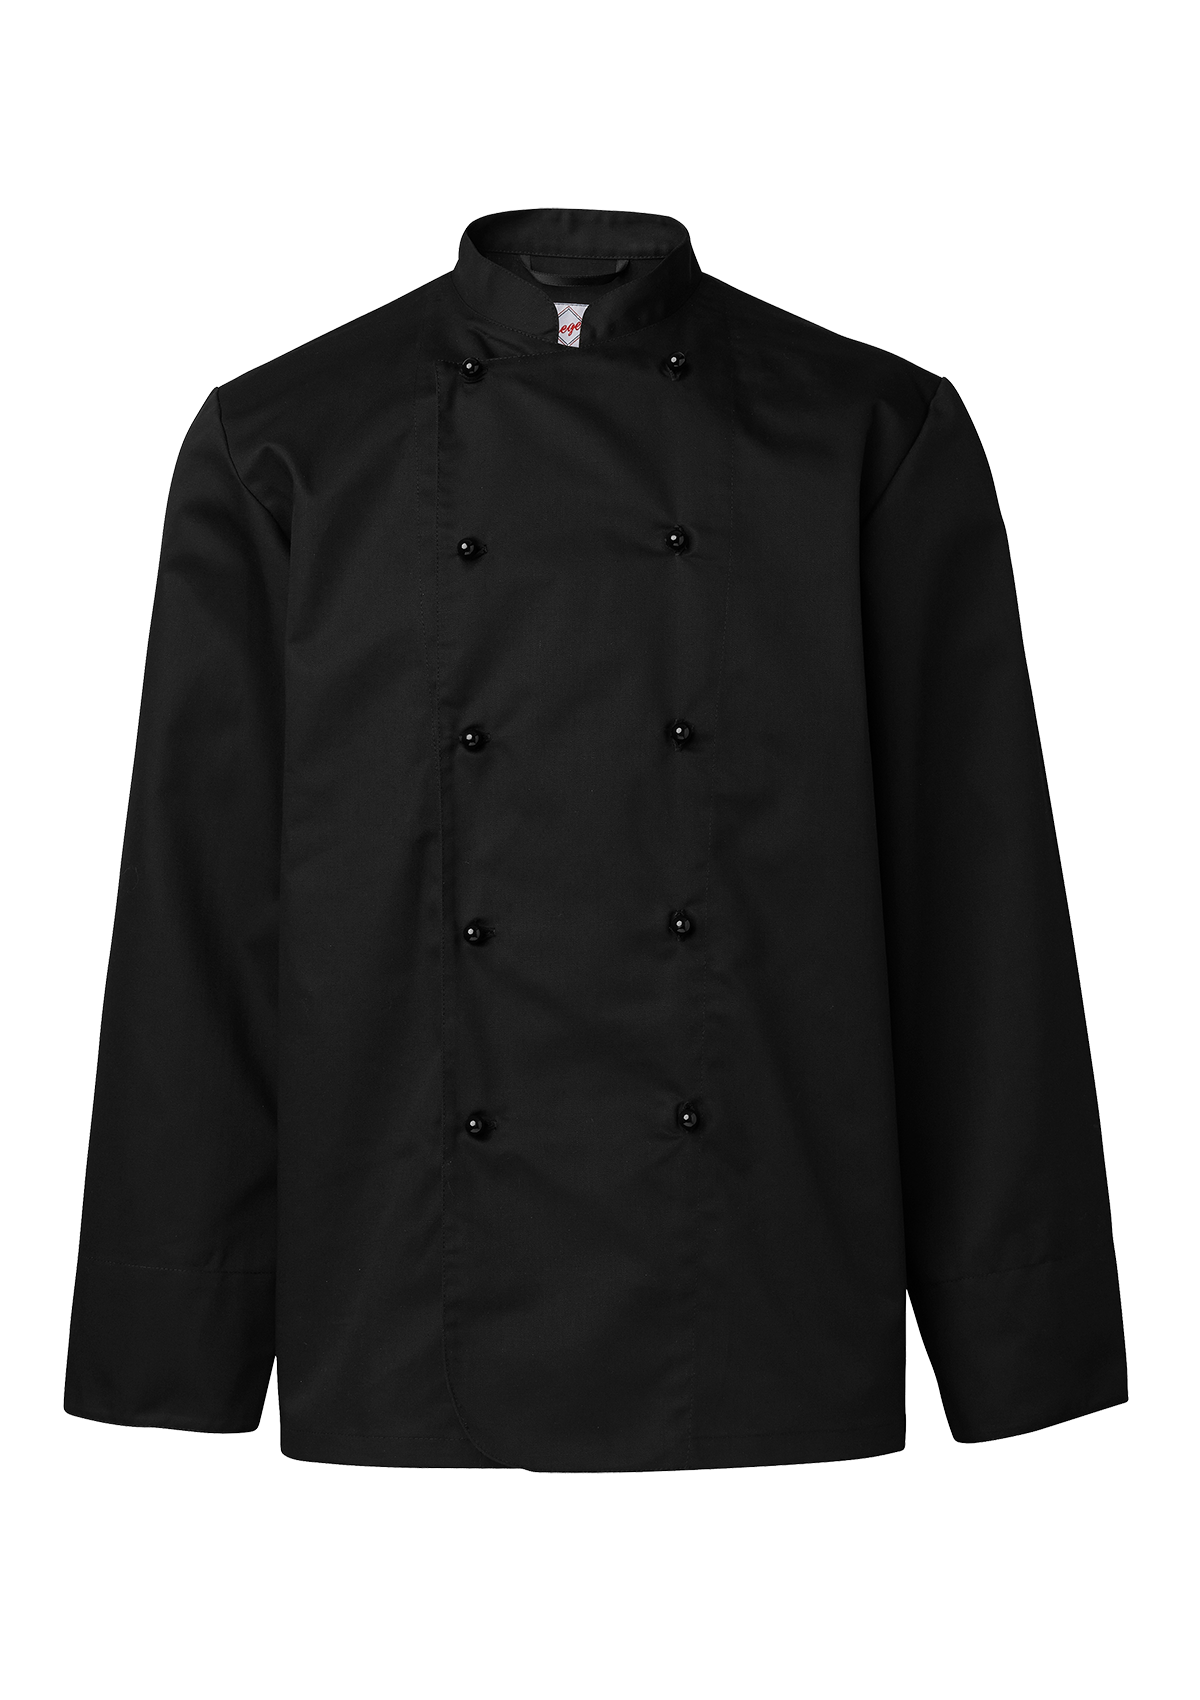 Men's Chef jacket in classic straight cut with long sleeves for men. Segers | Cookniche